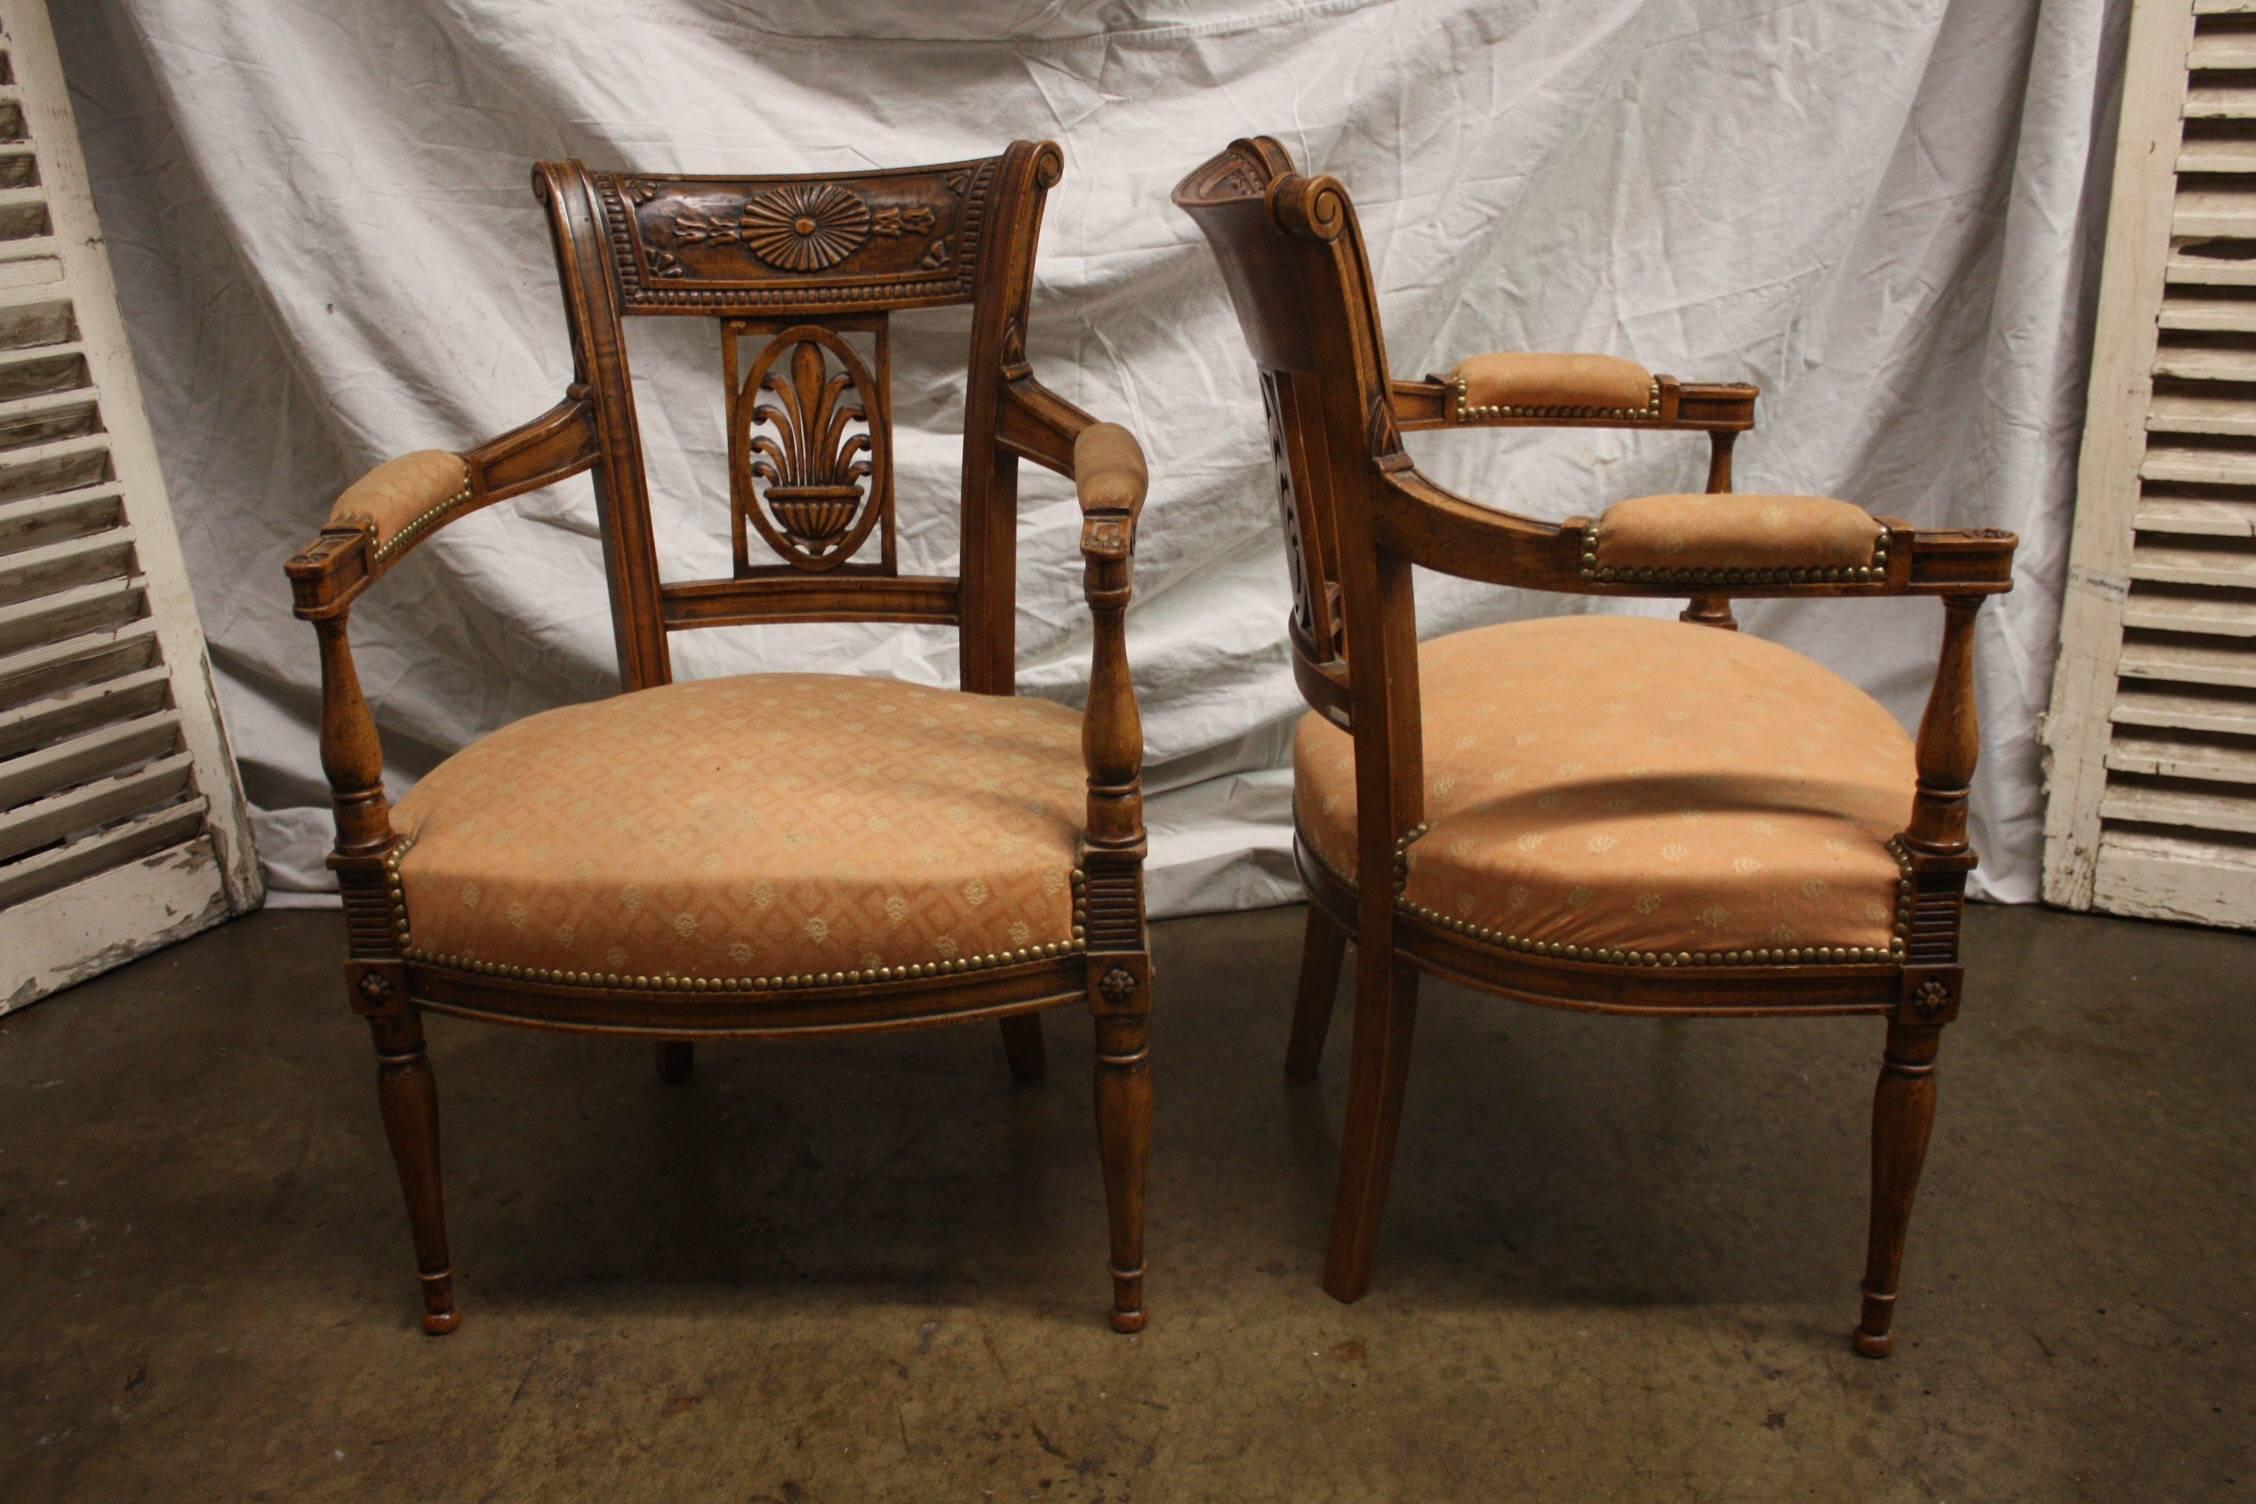 Beautiful pair of 19th century French armchairs.